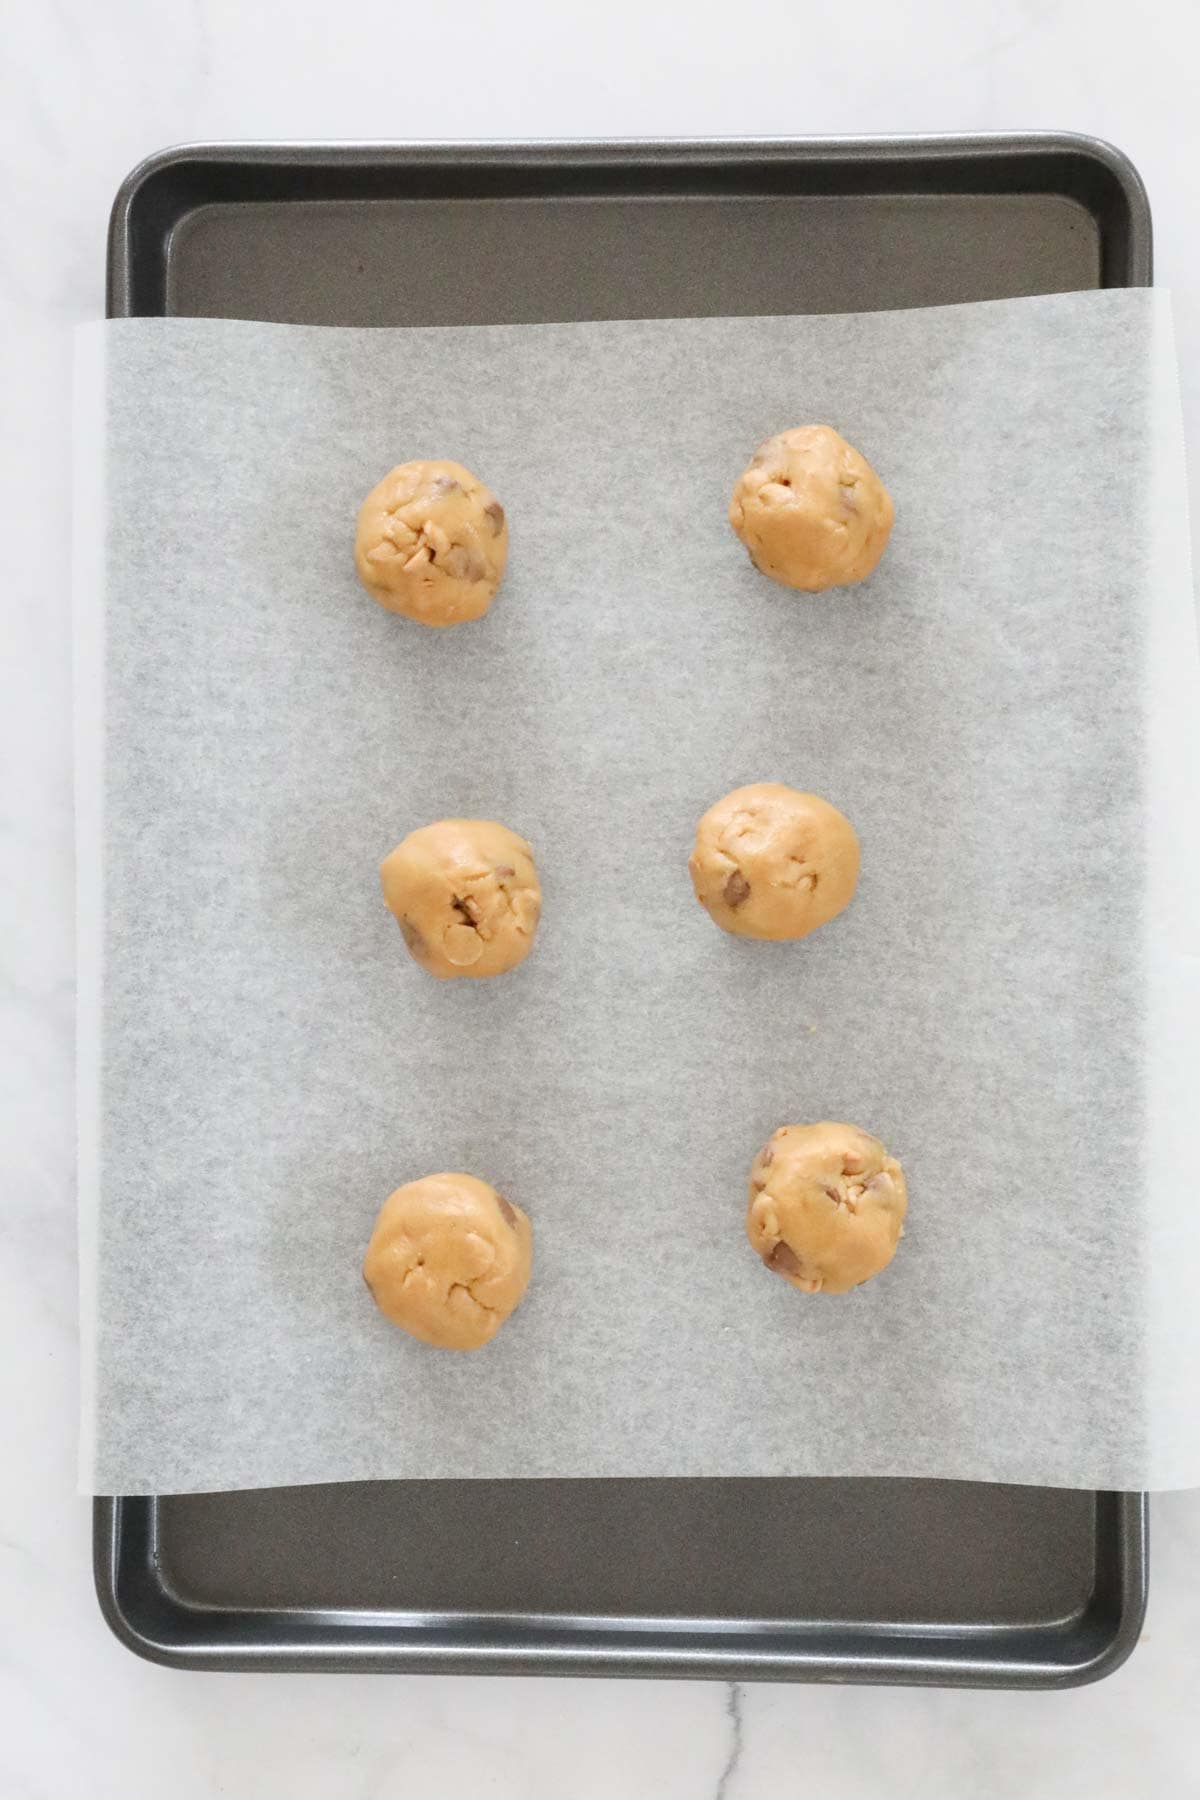 Cookie dough rolled in to balls and placed on a lined baking tray.